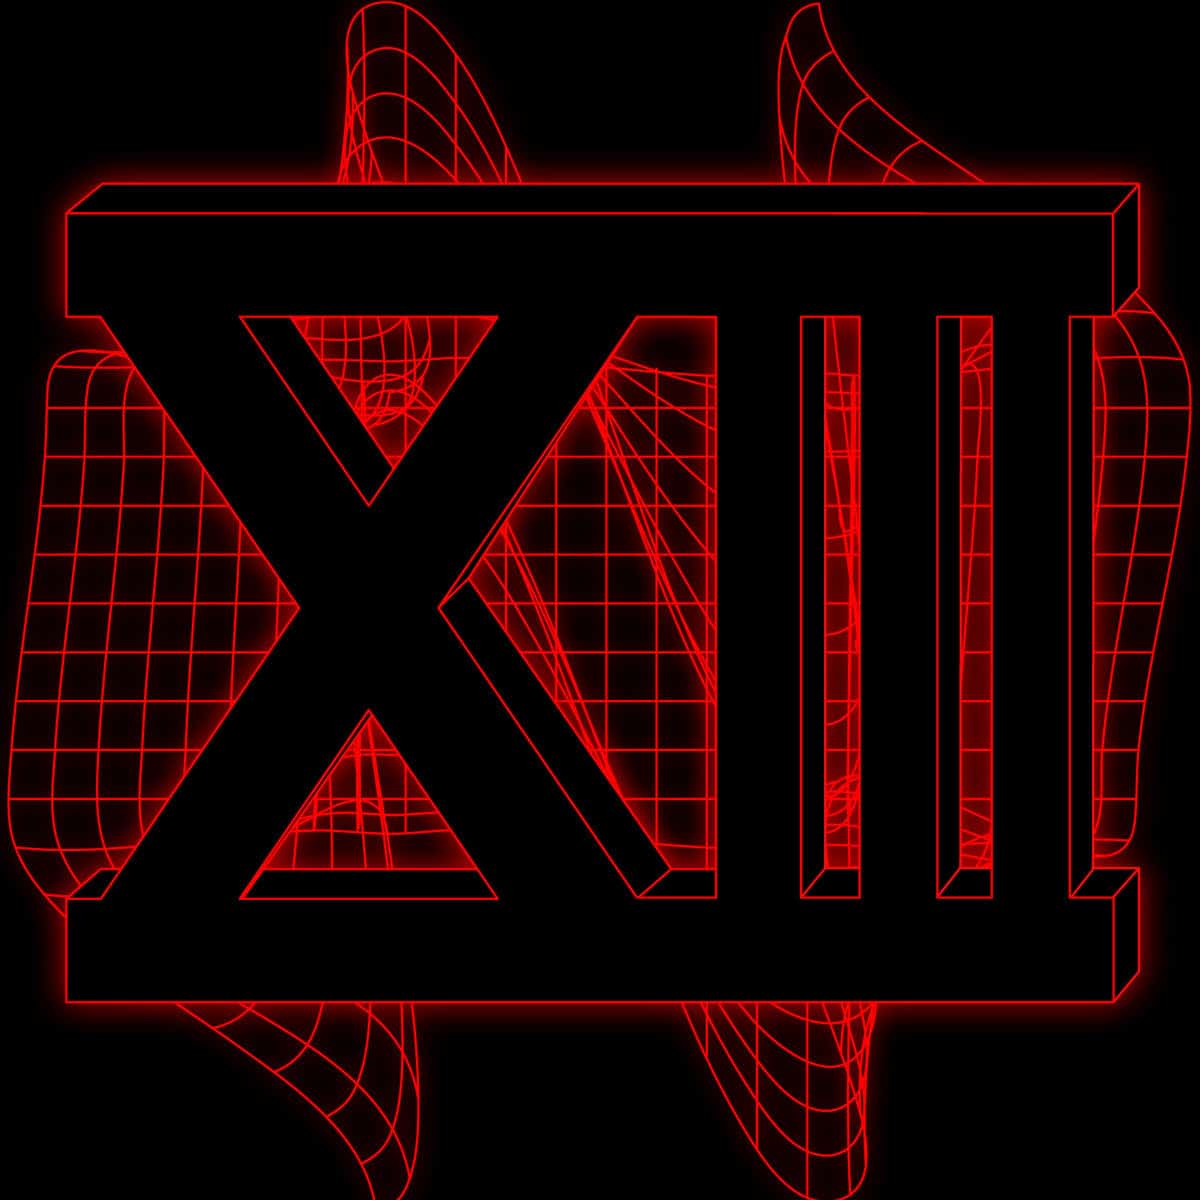 iZueL_ – XIII (Speaking with the wall) [RELEASE]